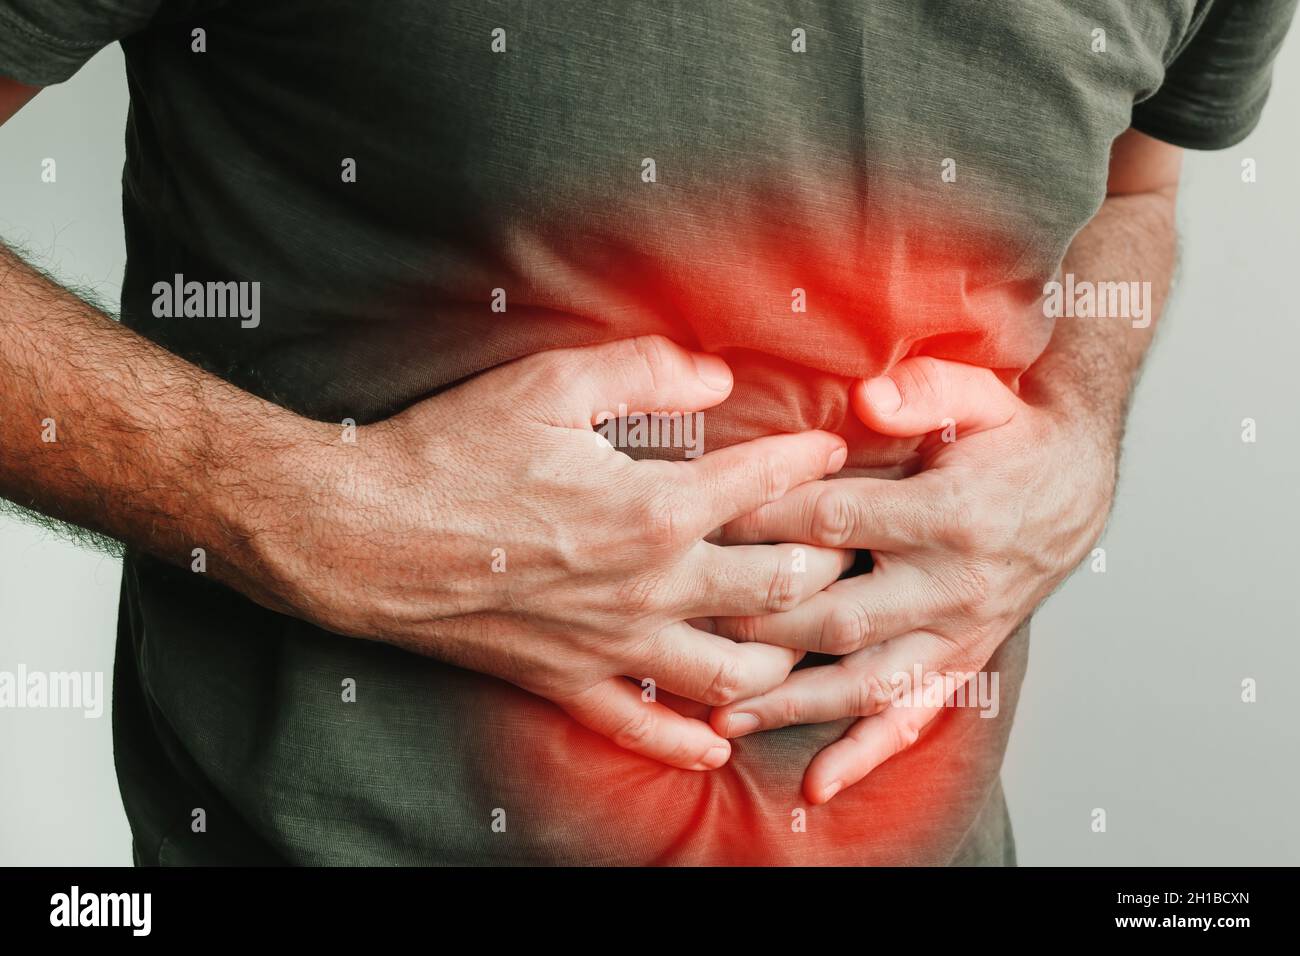 Gastritis, painful stomach inflammation process, adult male in pain Stock Photo